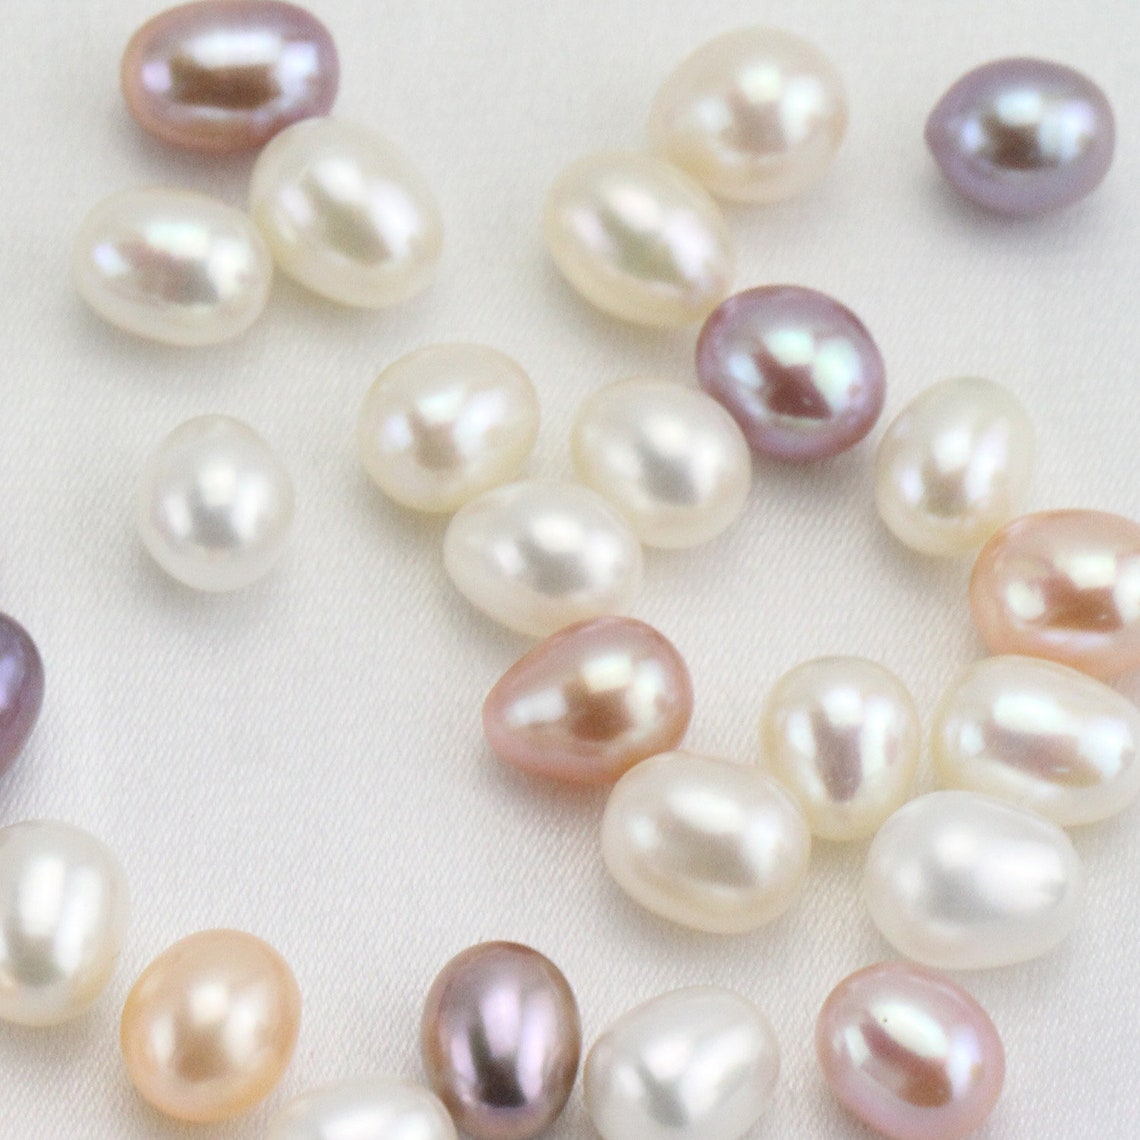 6-7mm Drop Pearl Pairs for Earringsfreshwater Pearl Rice Oval - Etsy